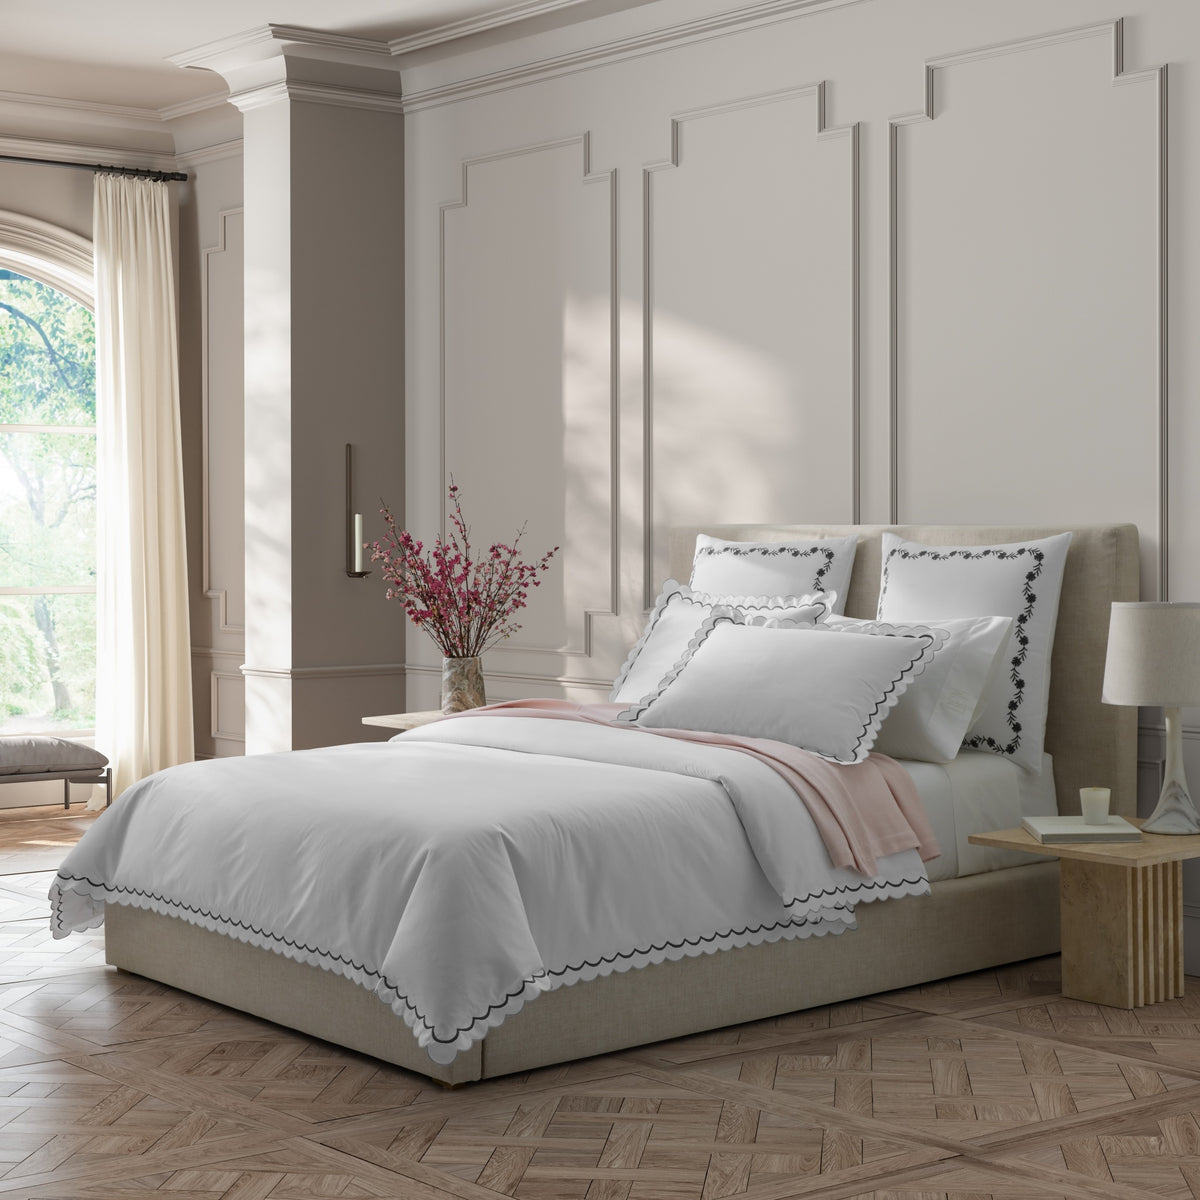 Full Bed Dressed in Matouk Bryant Bedding in Charcoal Color